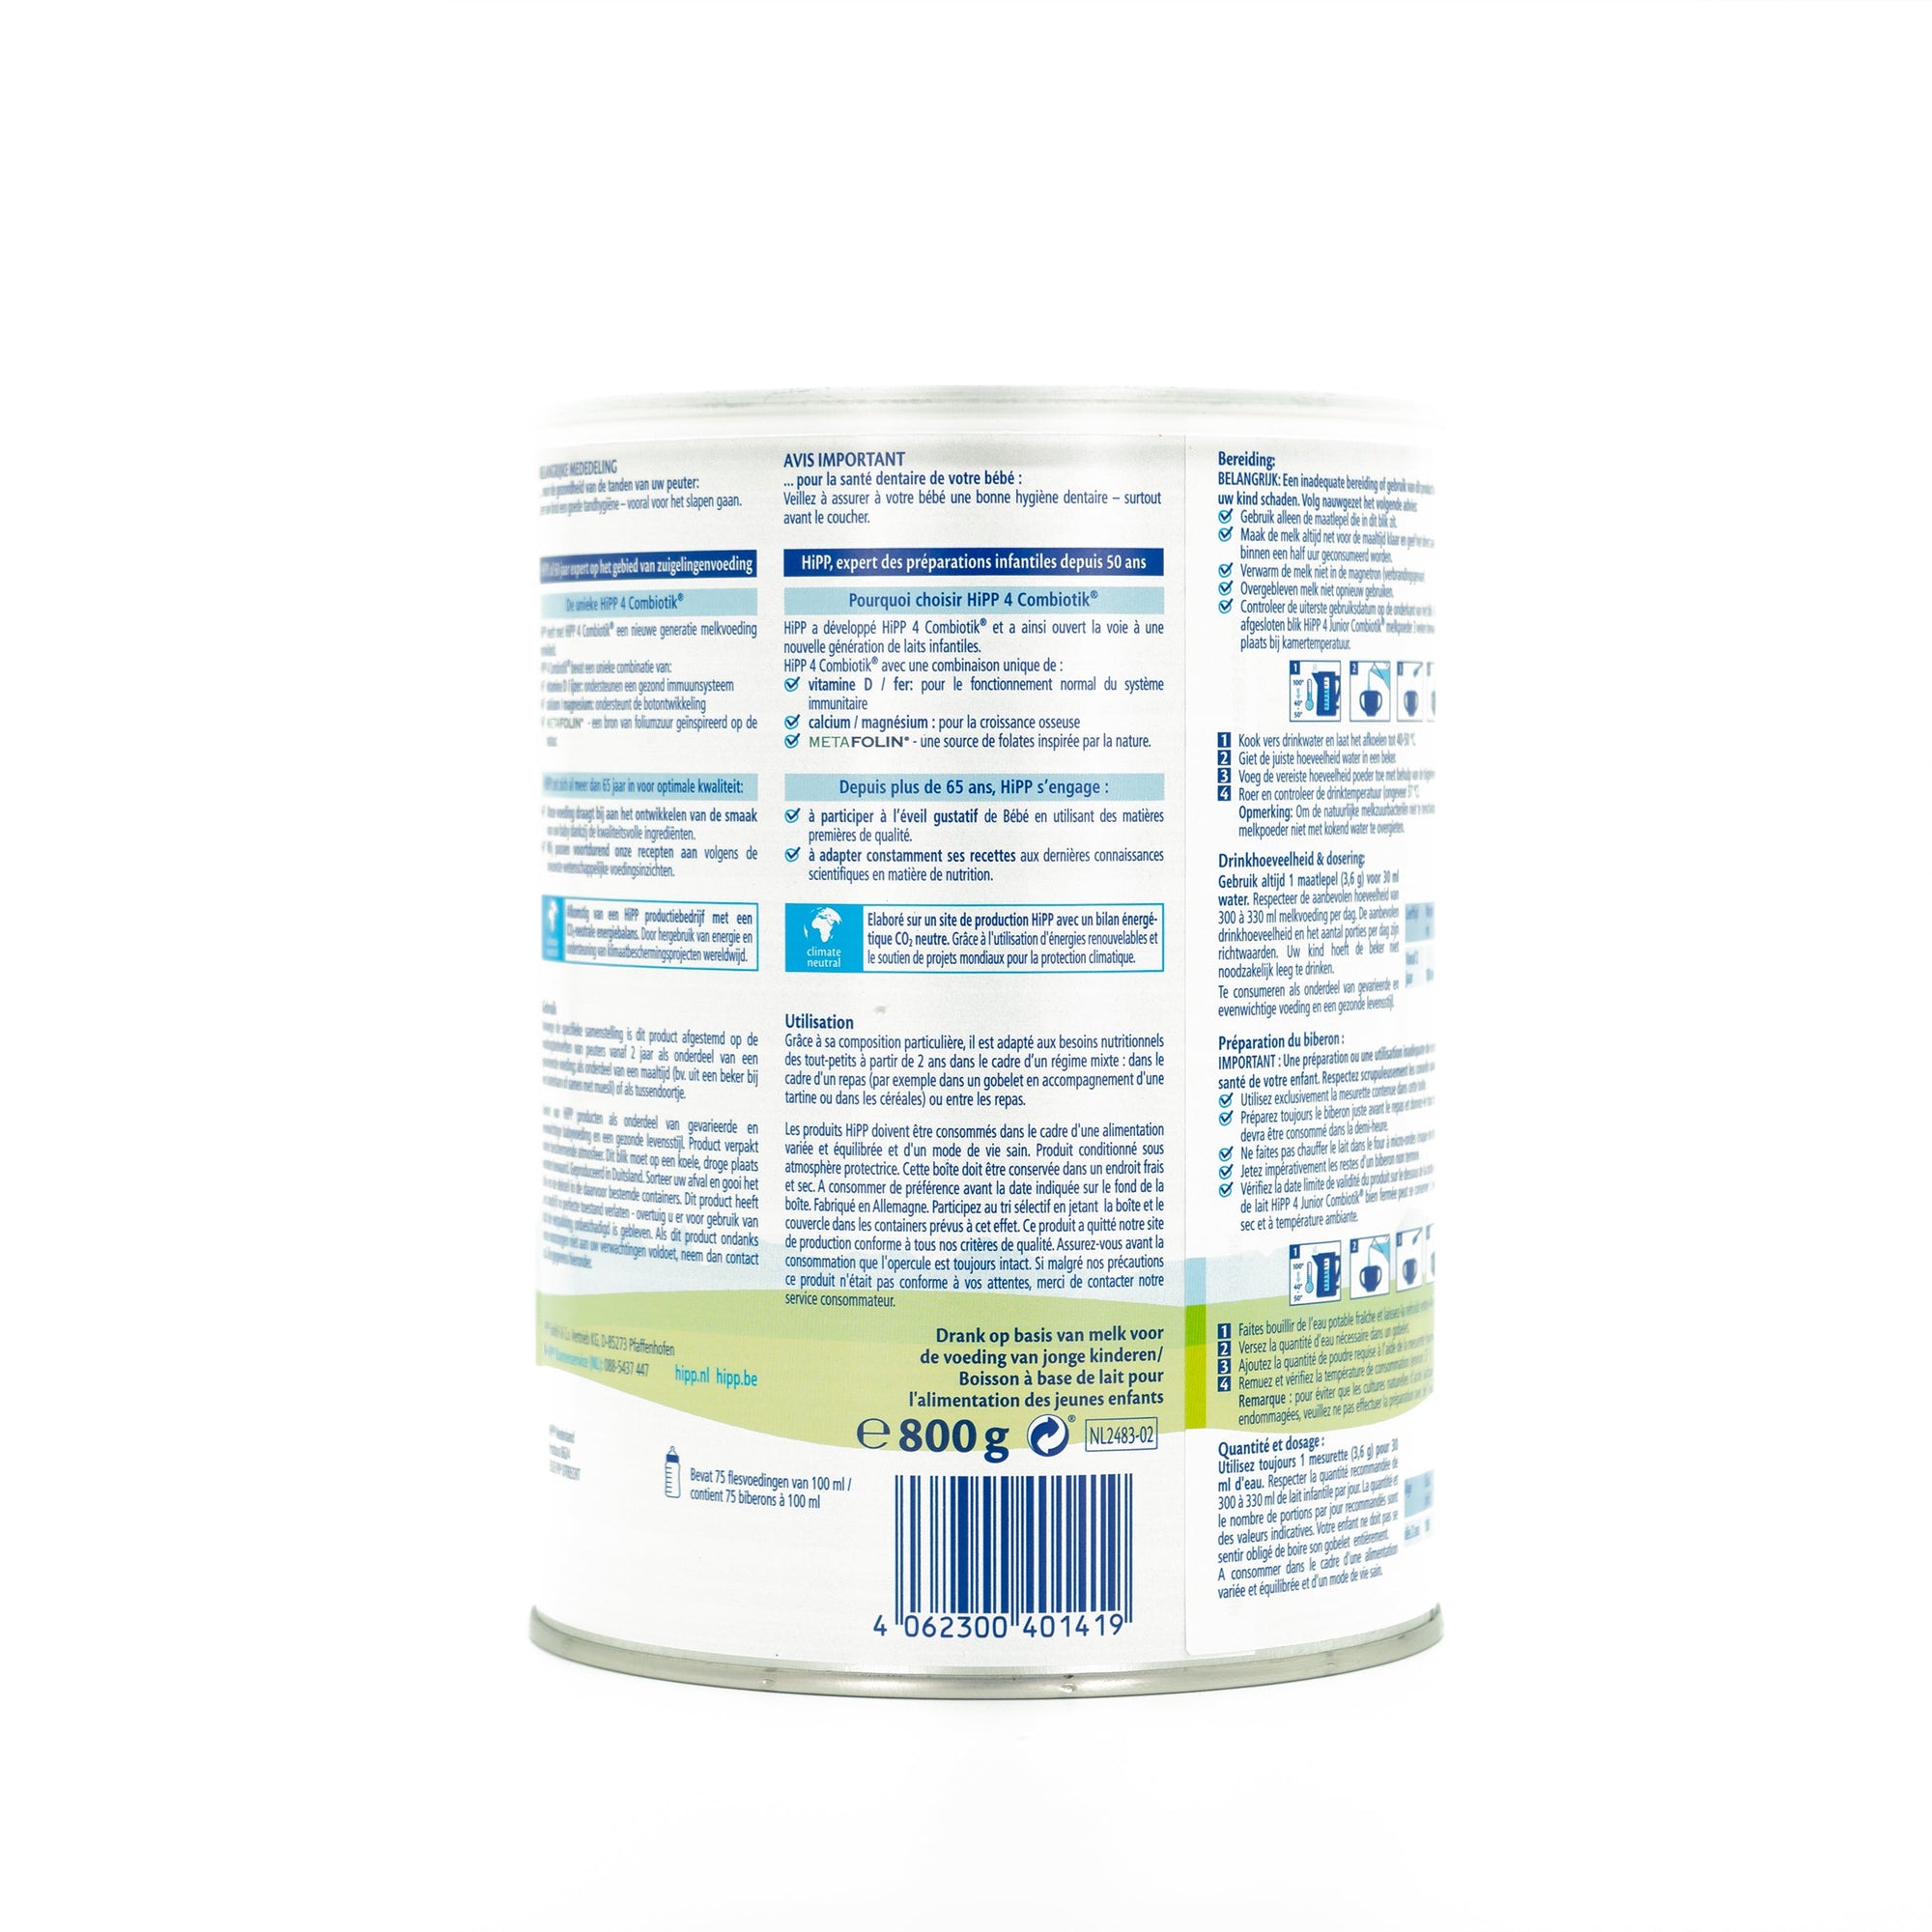 HiPP Dutch Stage 4 Combiotic Baby Formula | Nutrition Facts